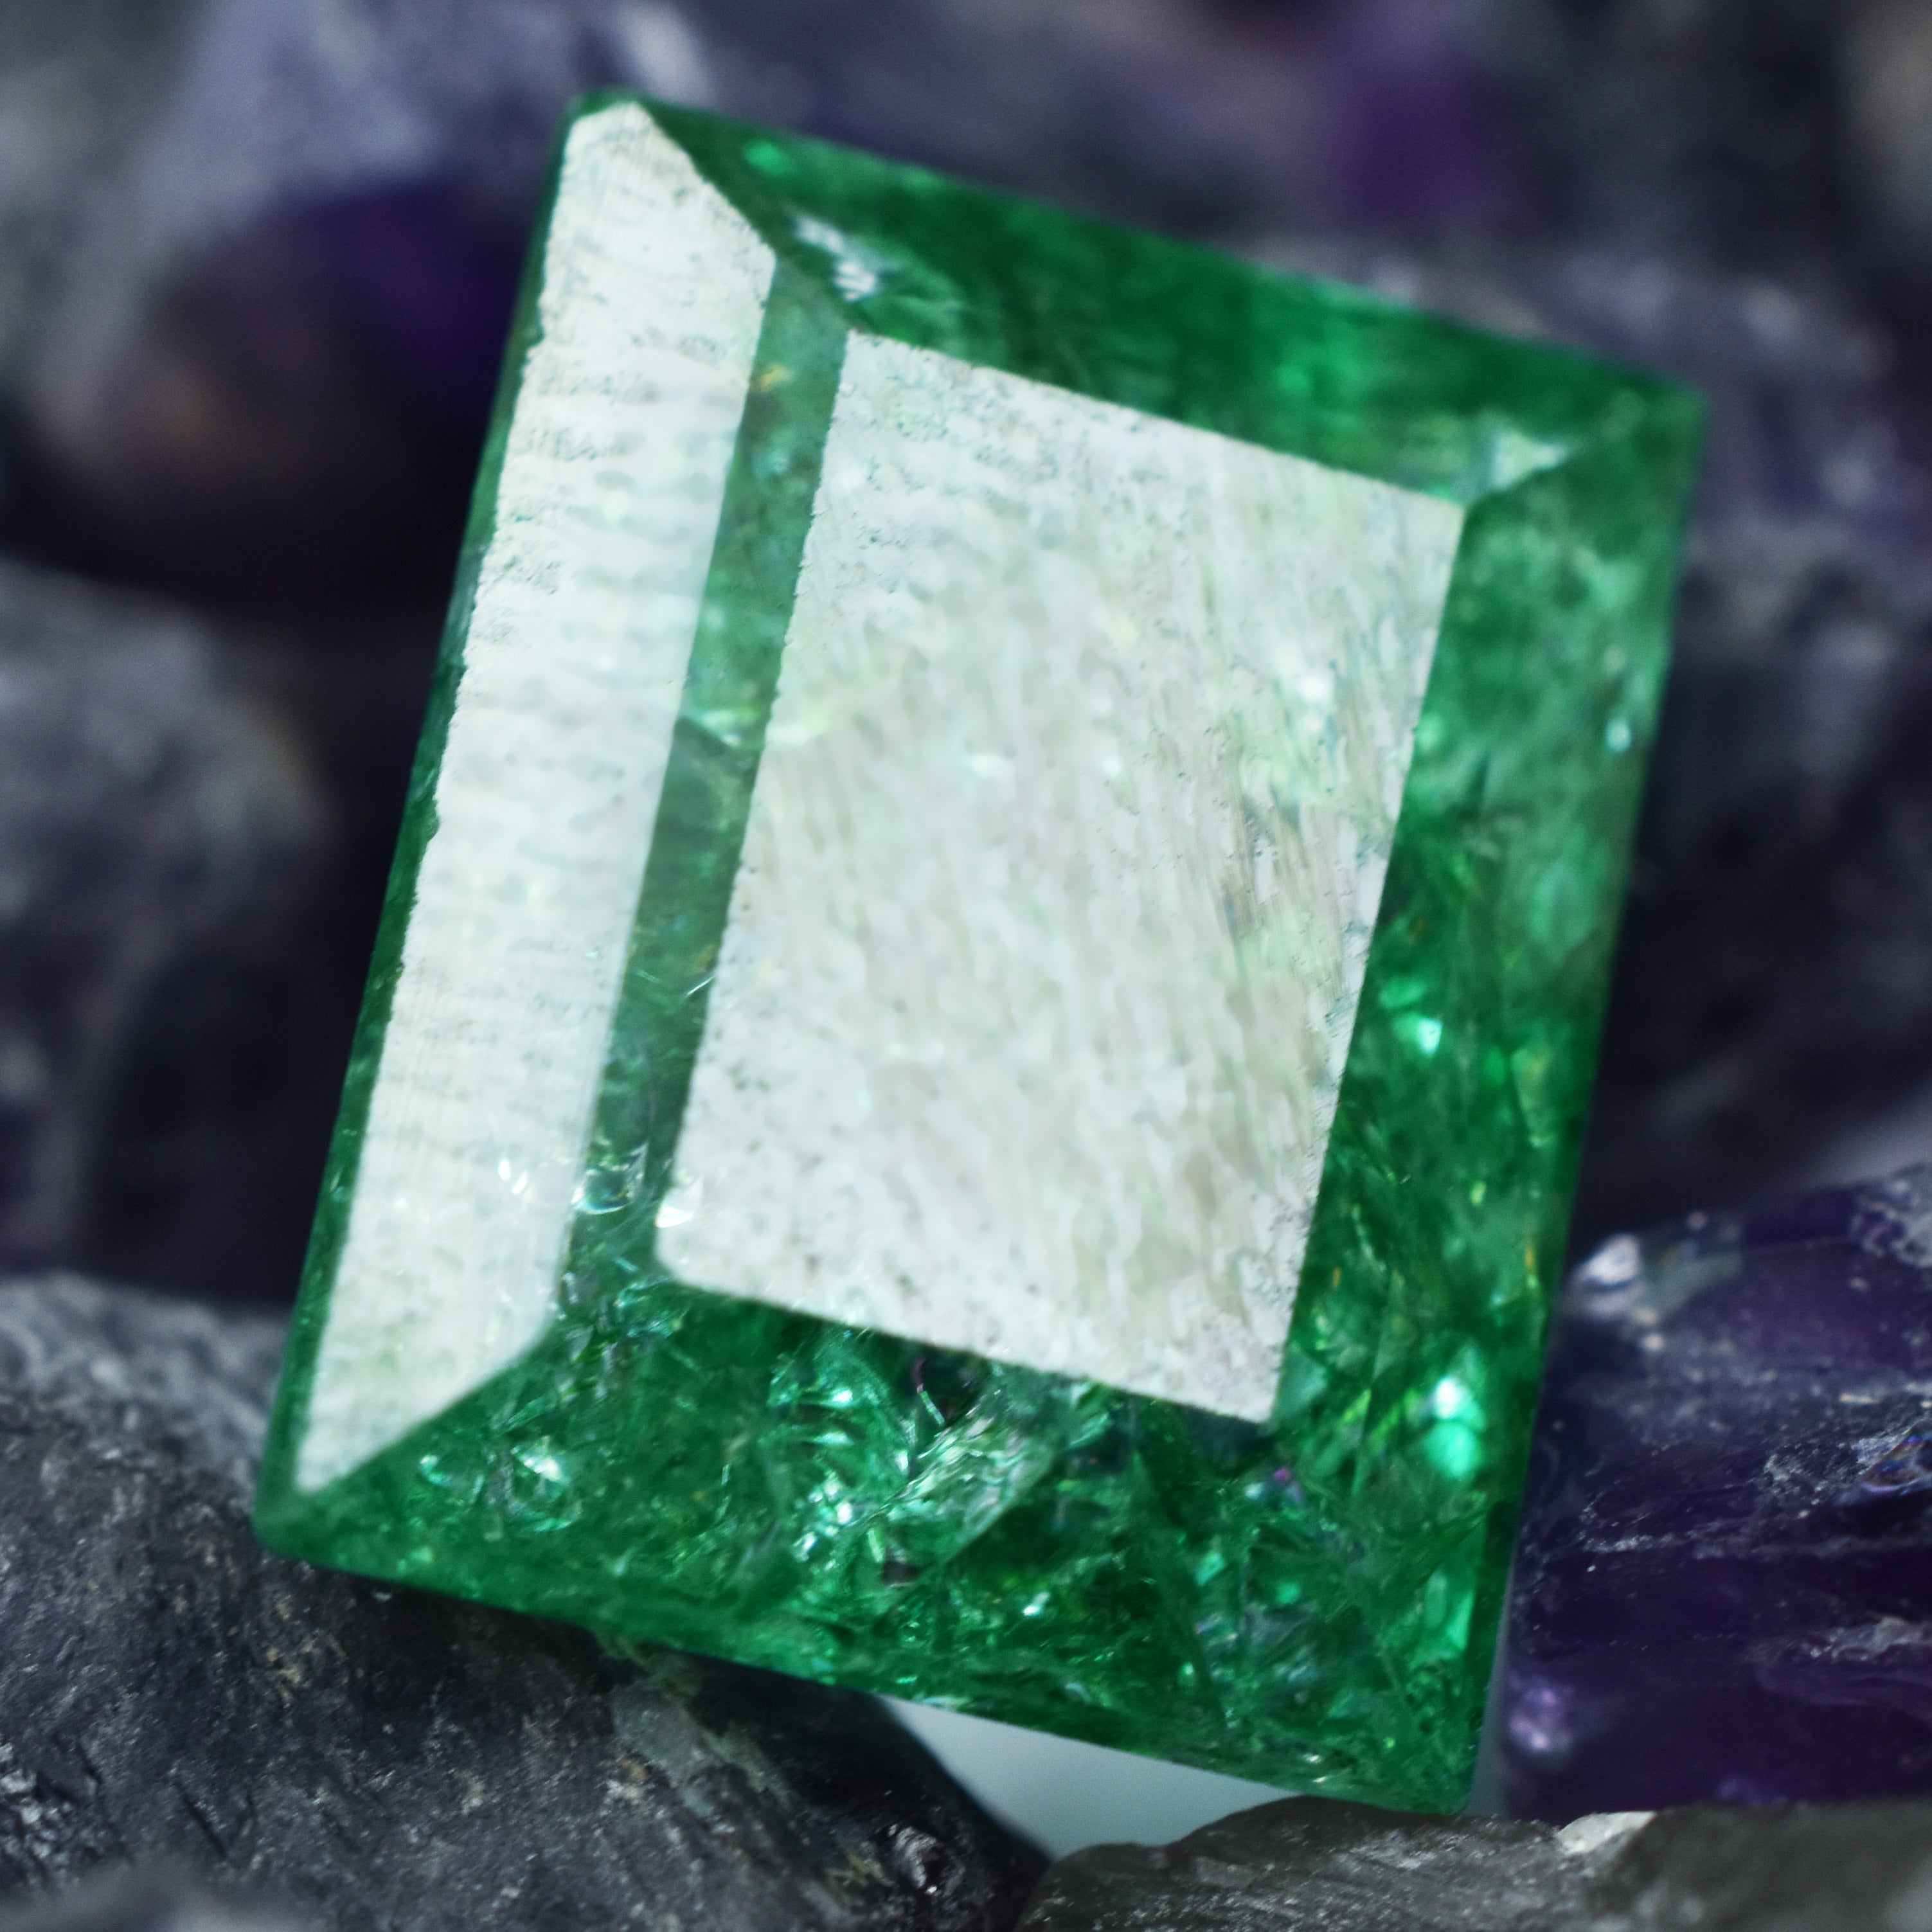 Expensive Gift Offer !!! Gift For Your Loved Ones , Certified 7.84 Carat Emerald Cut Green Emerald Natural Loose Gemstone , Emerald Cut Green Emerald Gemstone, Beautiful Emerald Green